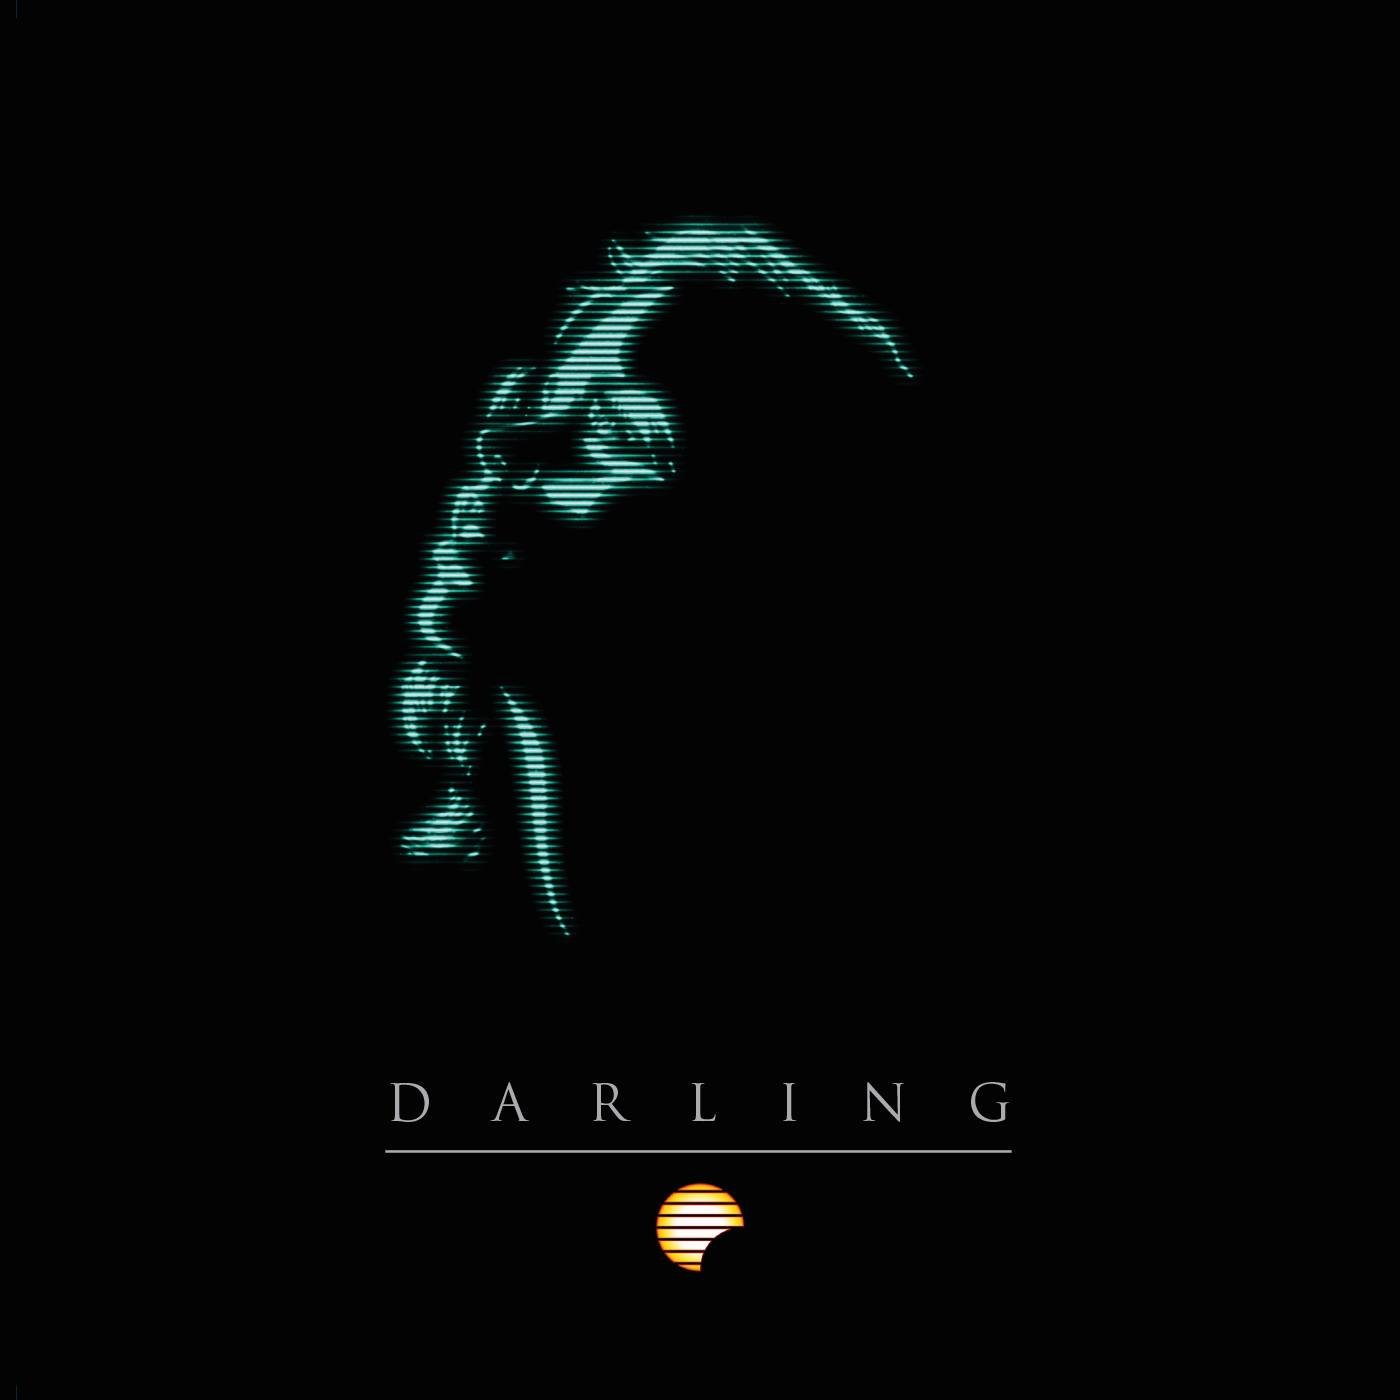  Illustration for MCC [Magna Carta Cartel] single “Darling” from ”The Dying Option” album | 2022 t-shirt merchandise 